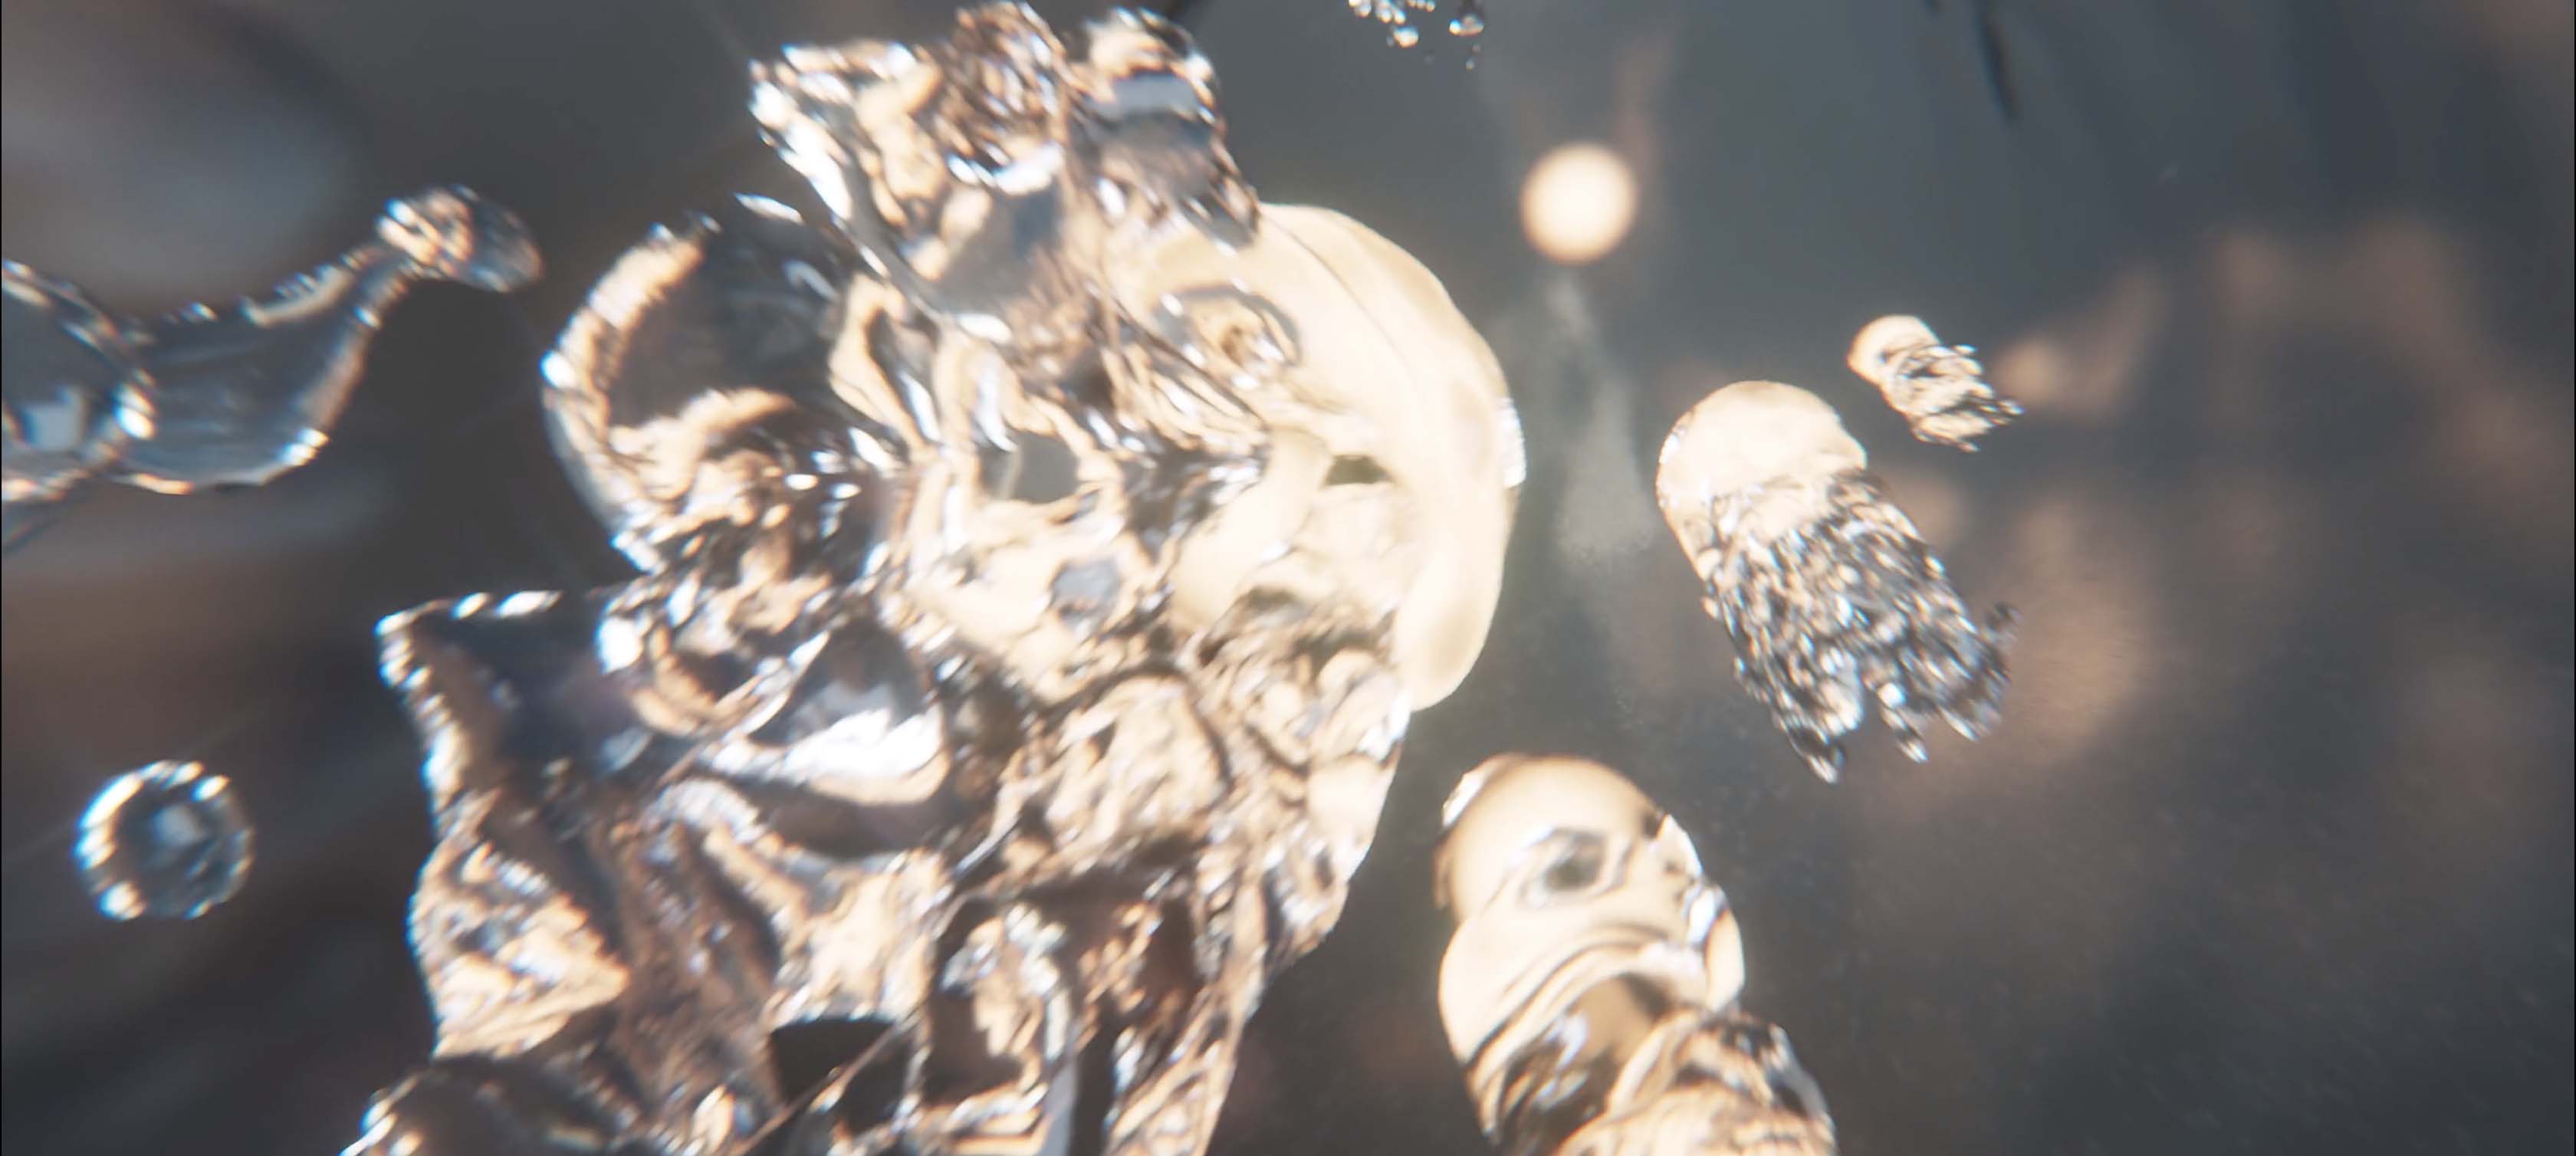 This image shows a 3D animation of sustainable chemical fluids